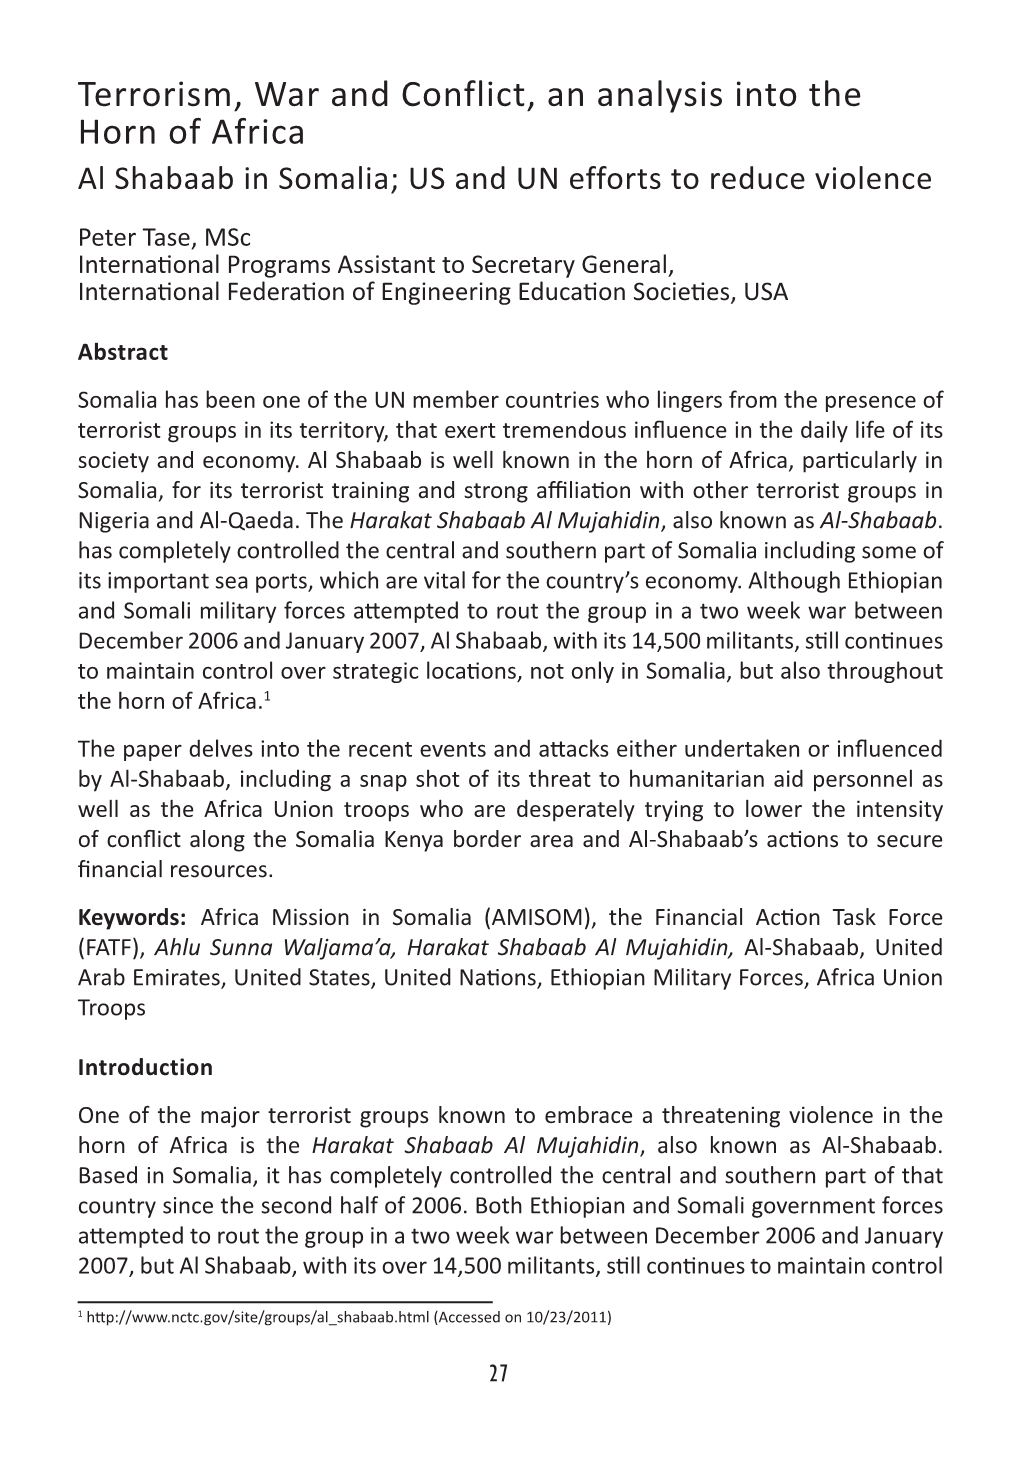 Terrorism, War and Conflict, an Analysis Into the Horn of Africa Al Shabaab in Somalia; US and UN Efforts to Reduce Violence